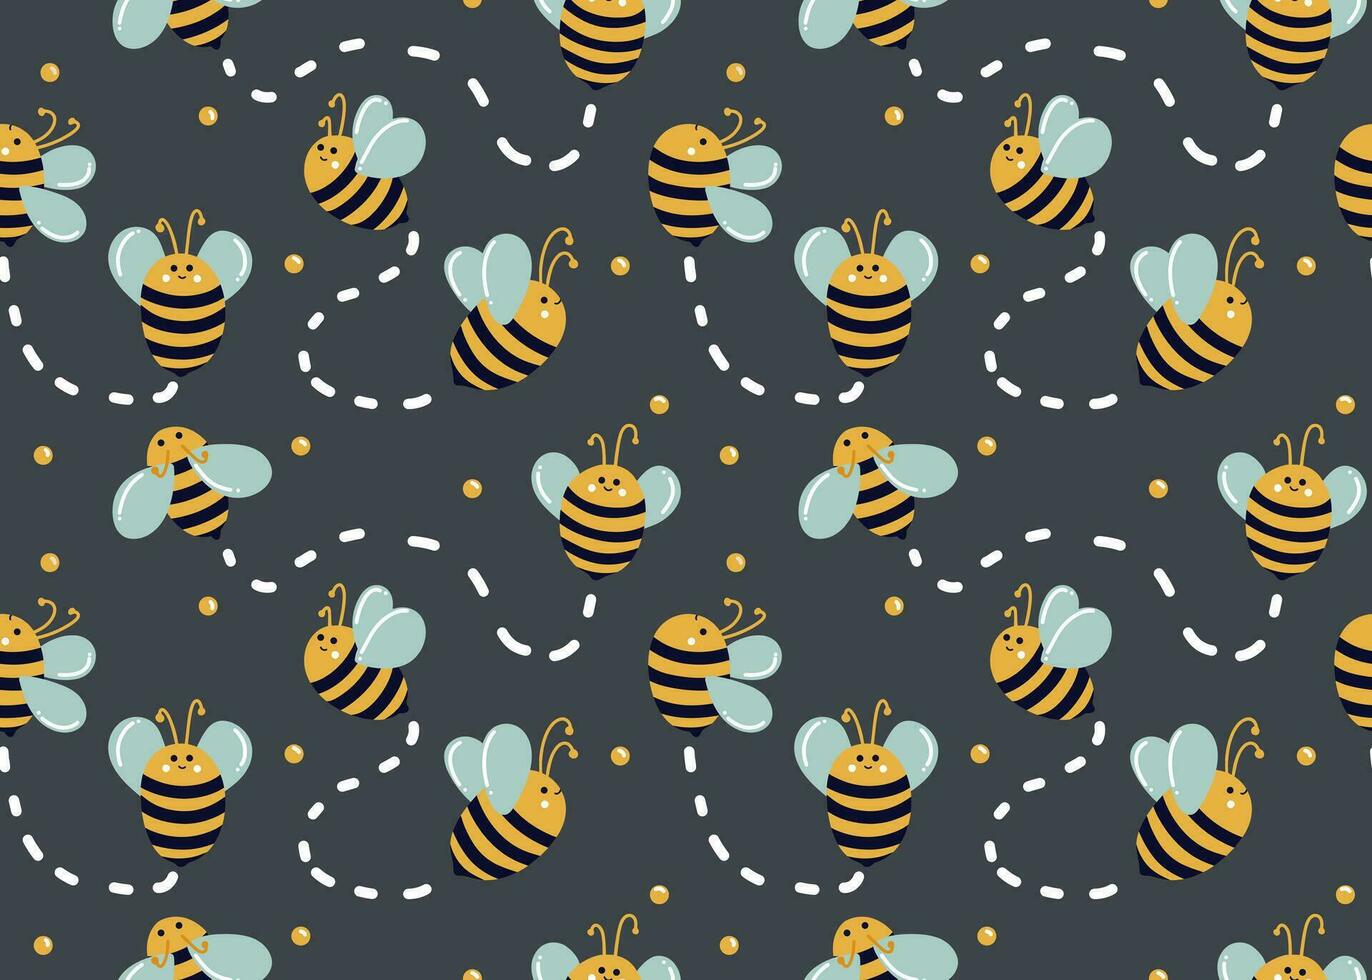 Bees move in different directions on blue background with honey droplets and lines of movement. Cute bees. Seamless bee pattern for kids. Summer pattern for fabrics, bed linen, decor vector